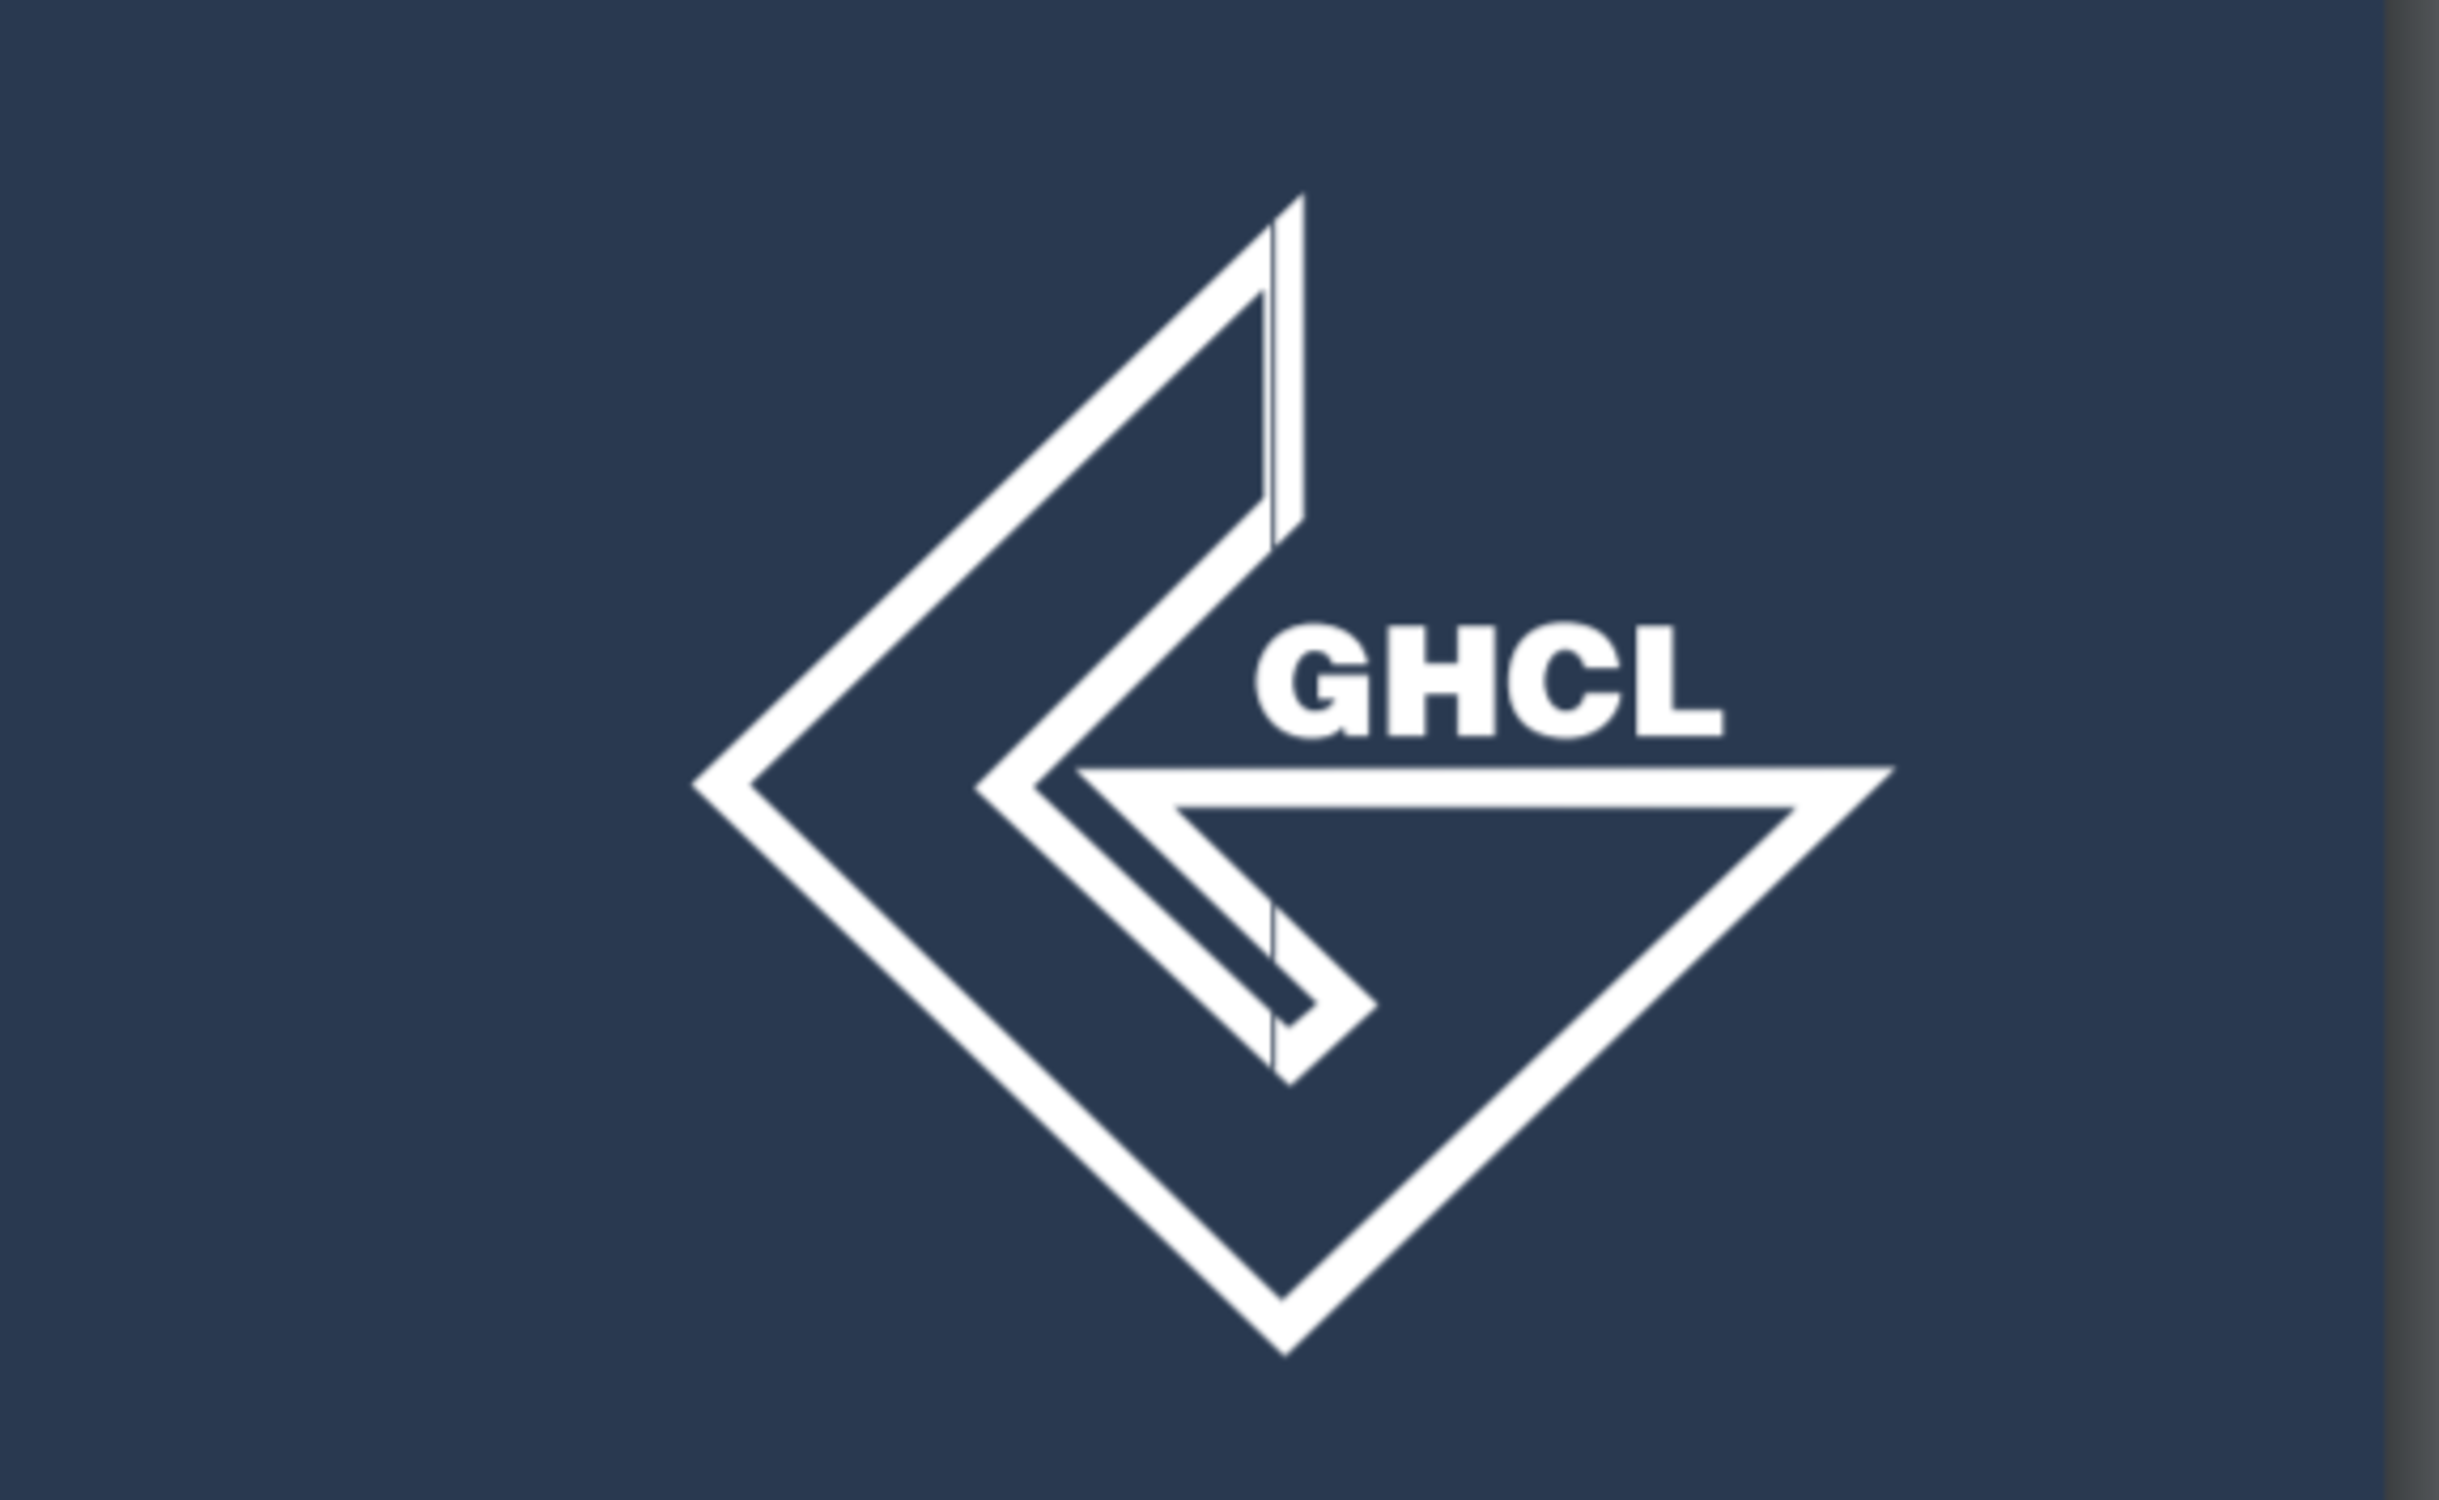 GHCL recognized as being among the Best workplaces in Chemical Industry 2021